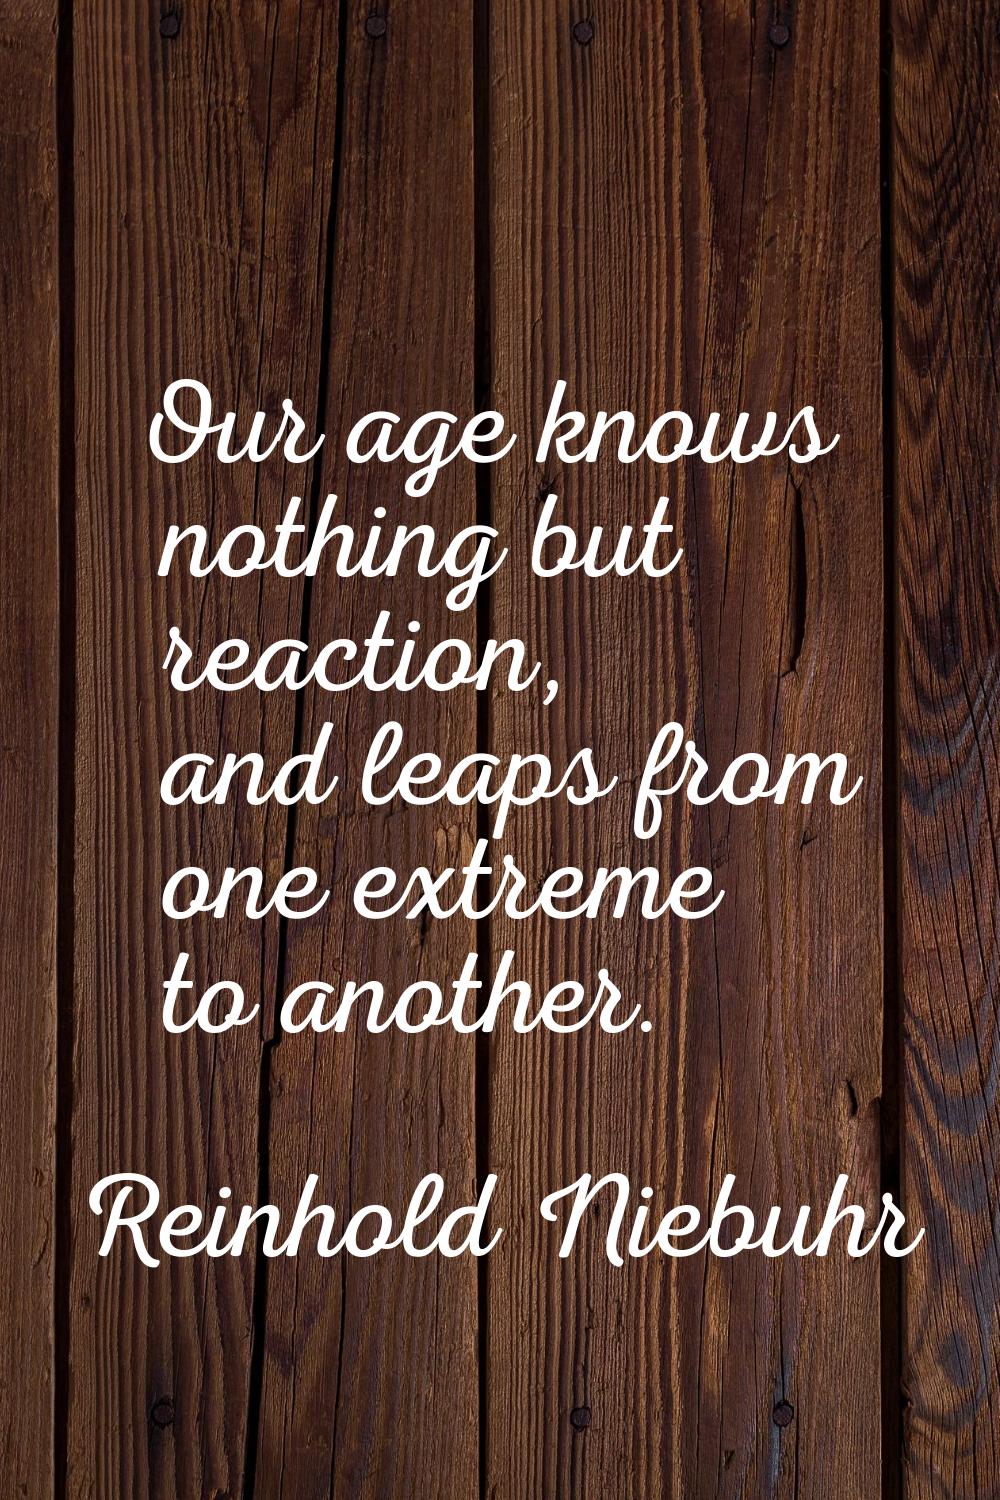 Our age knows nothing but reaction, and leaps from one extreme to another.